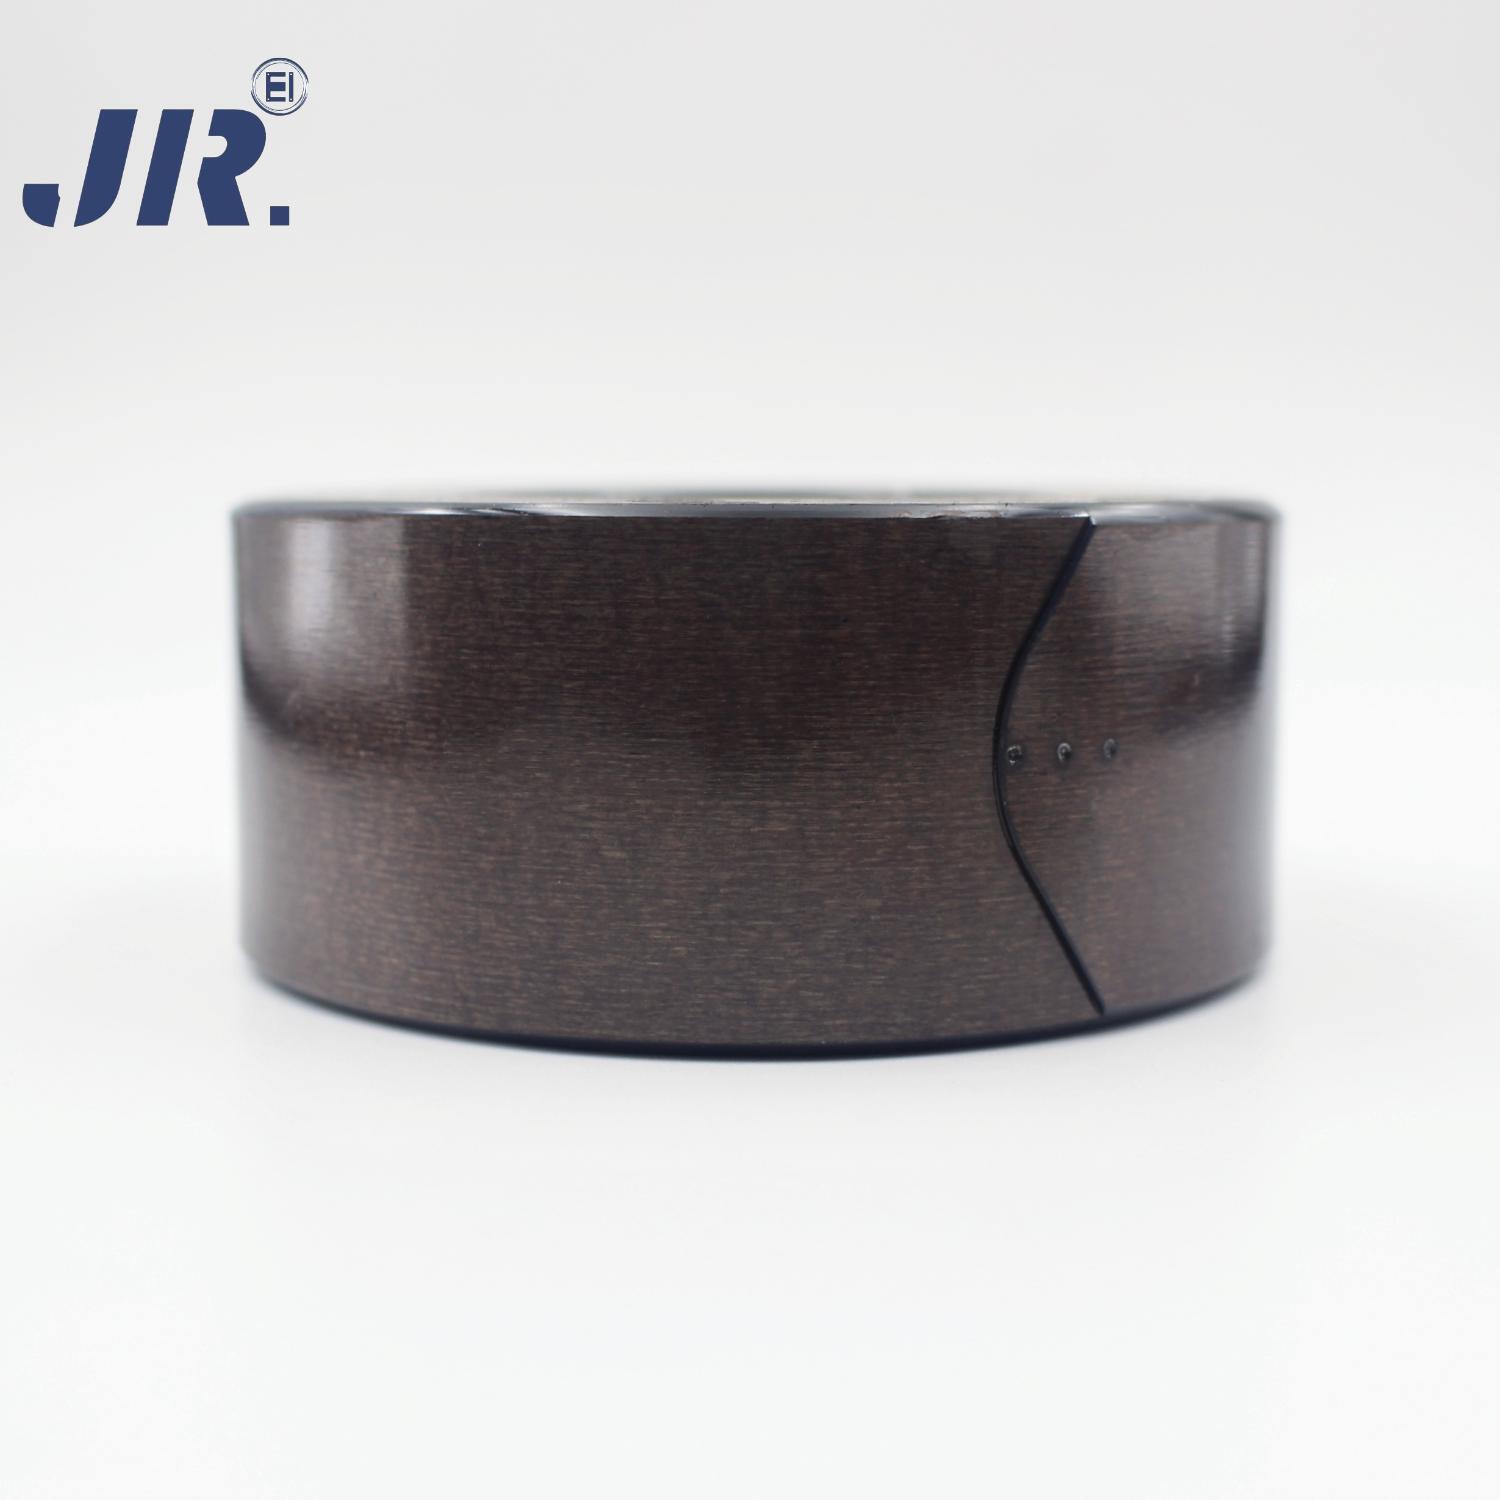 Non-Oriented High Frequency Ring Transformer Iron Core